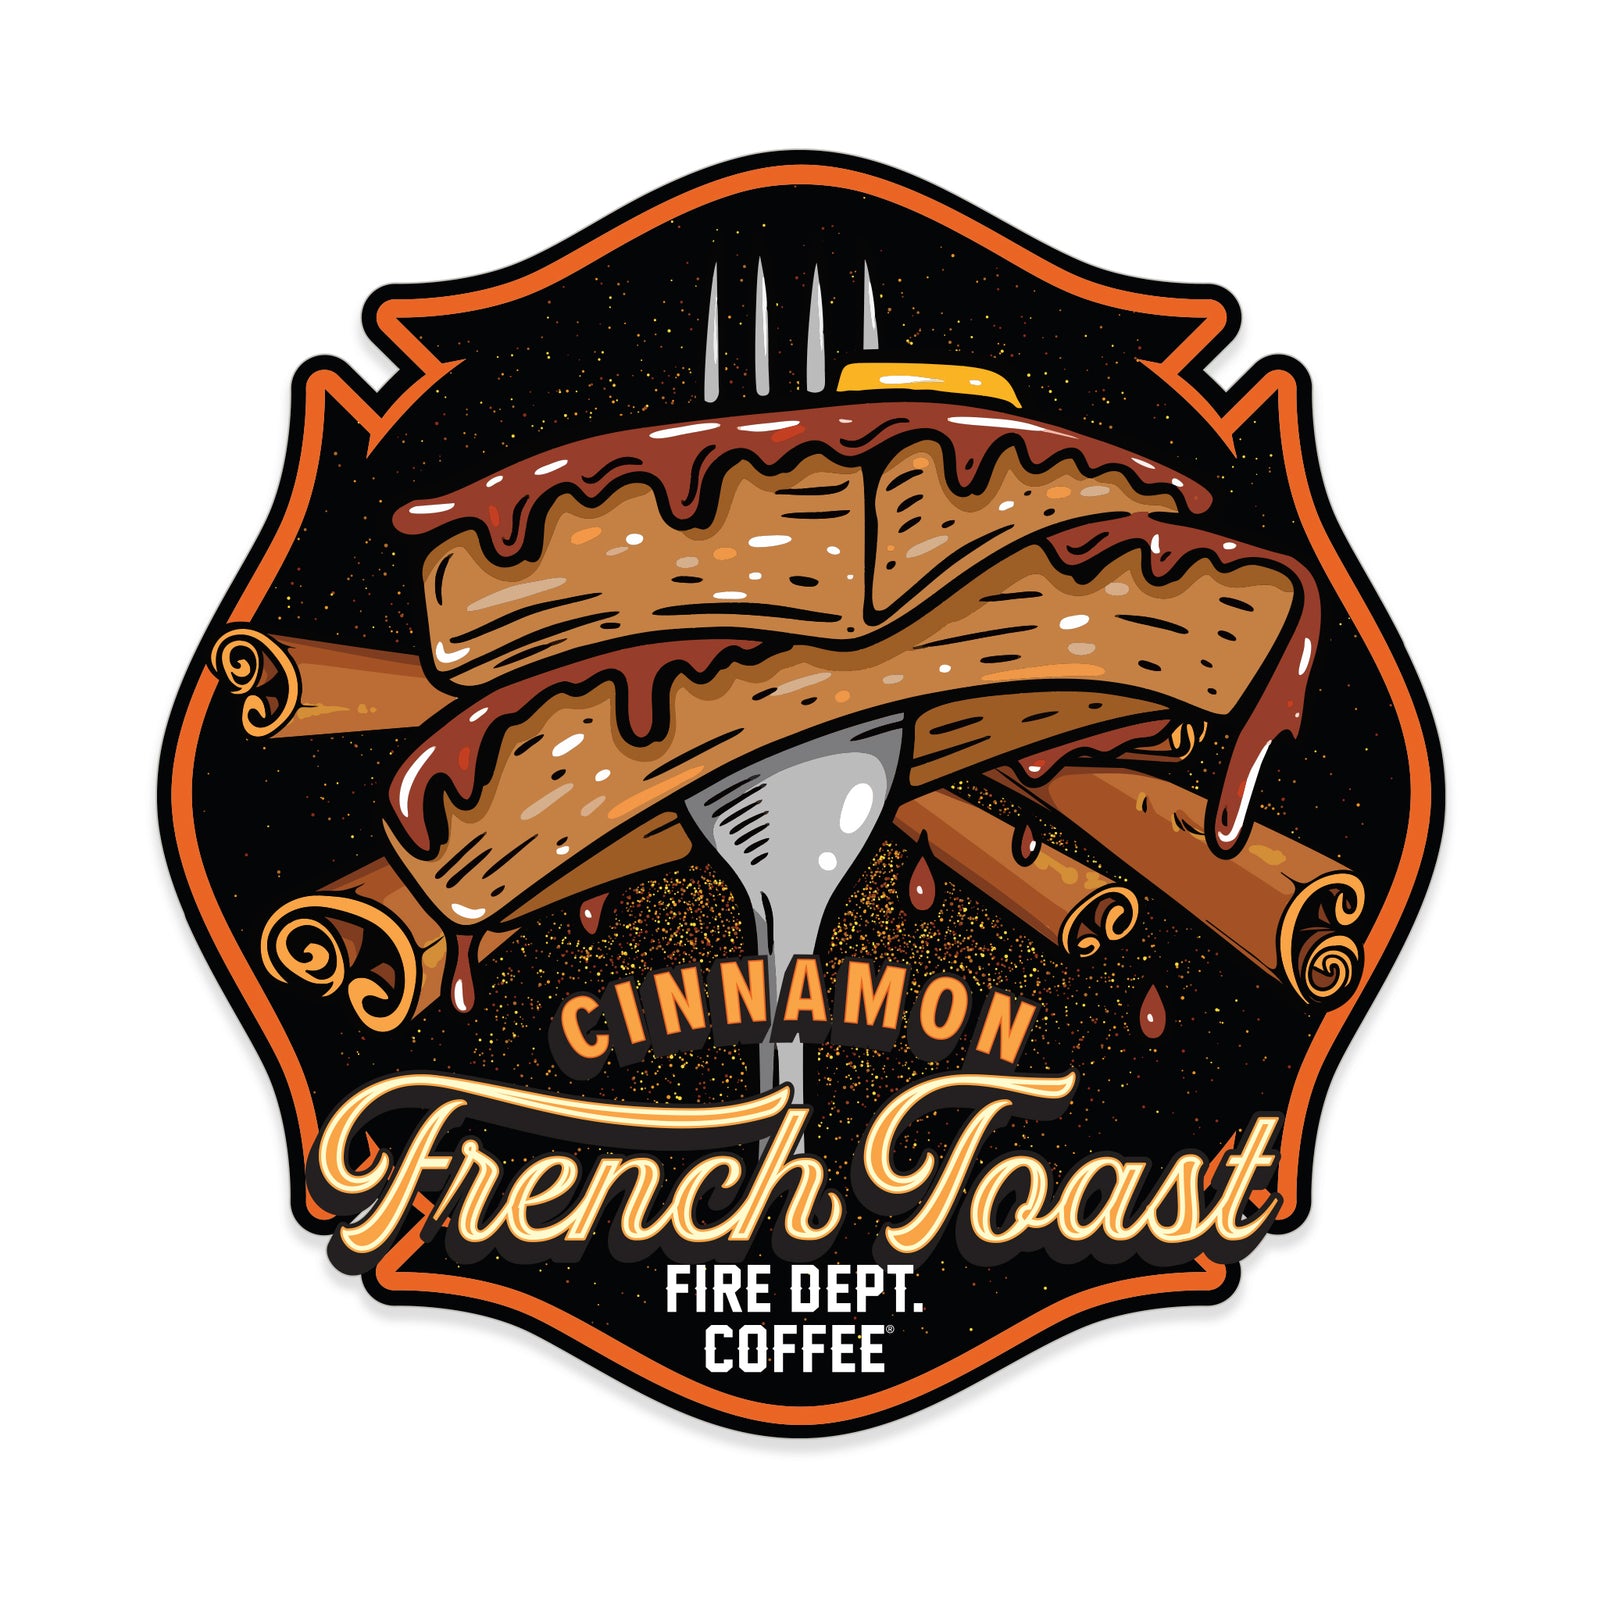 An illustration of a fork holding cinnamon french toast with text that reads CINNAMON FRENCH TOAST